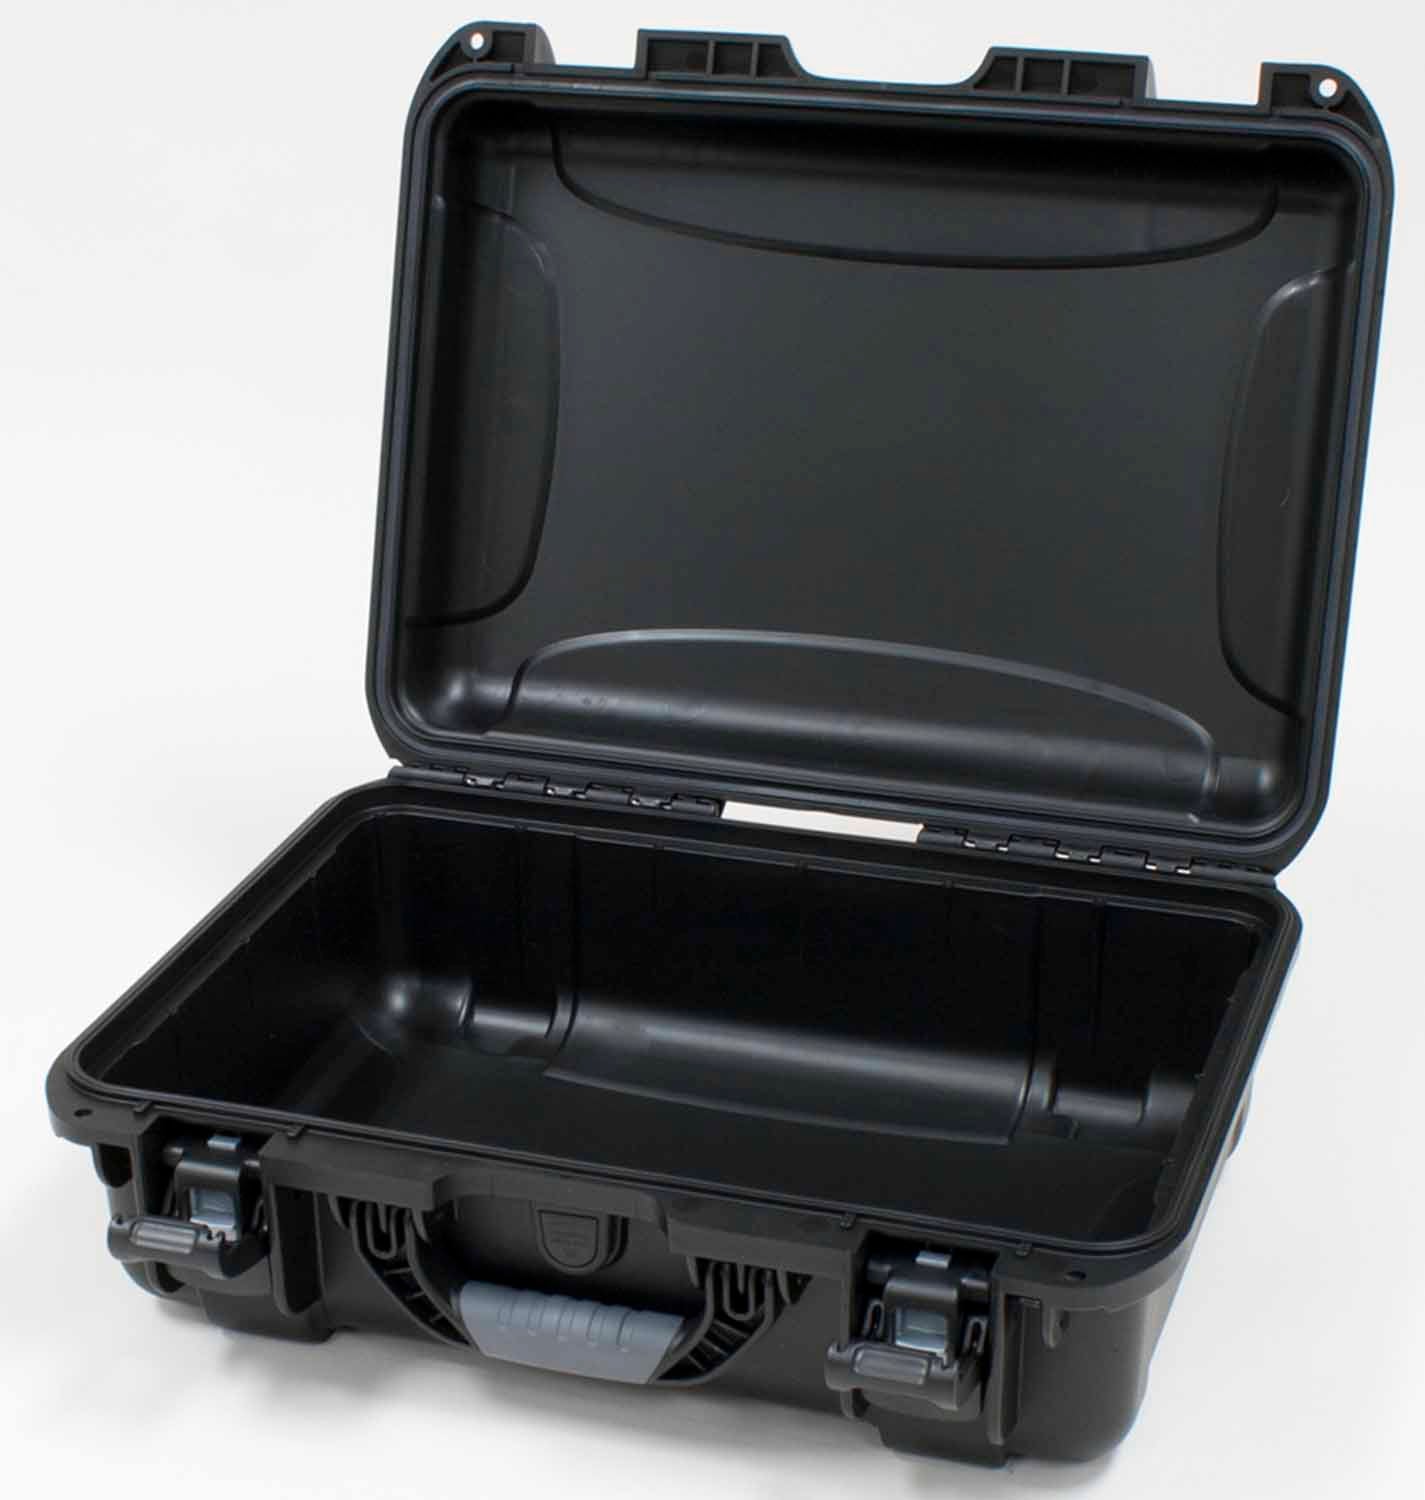 Gator Cases GU-1711-06-WPNF Waterproof Injection Molded Case with Interior Dimensions of 17″ x 11.8″ x 6.4″ - Hollywood DJ